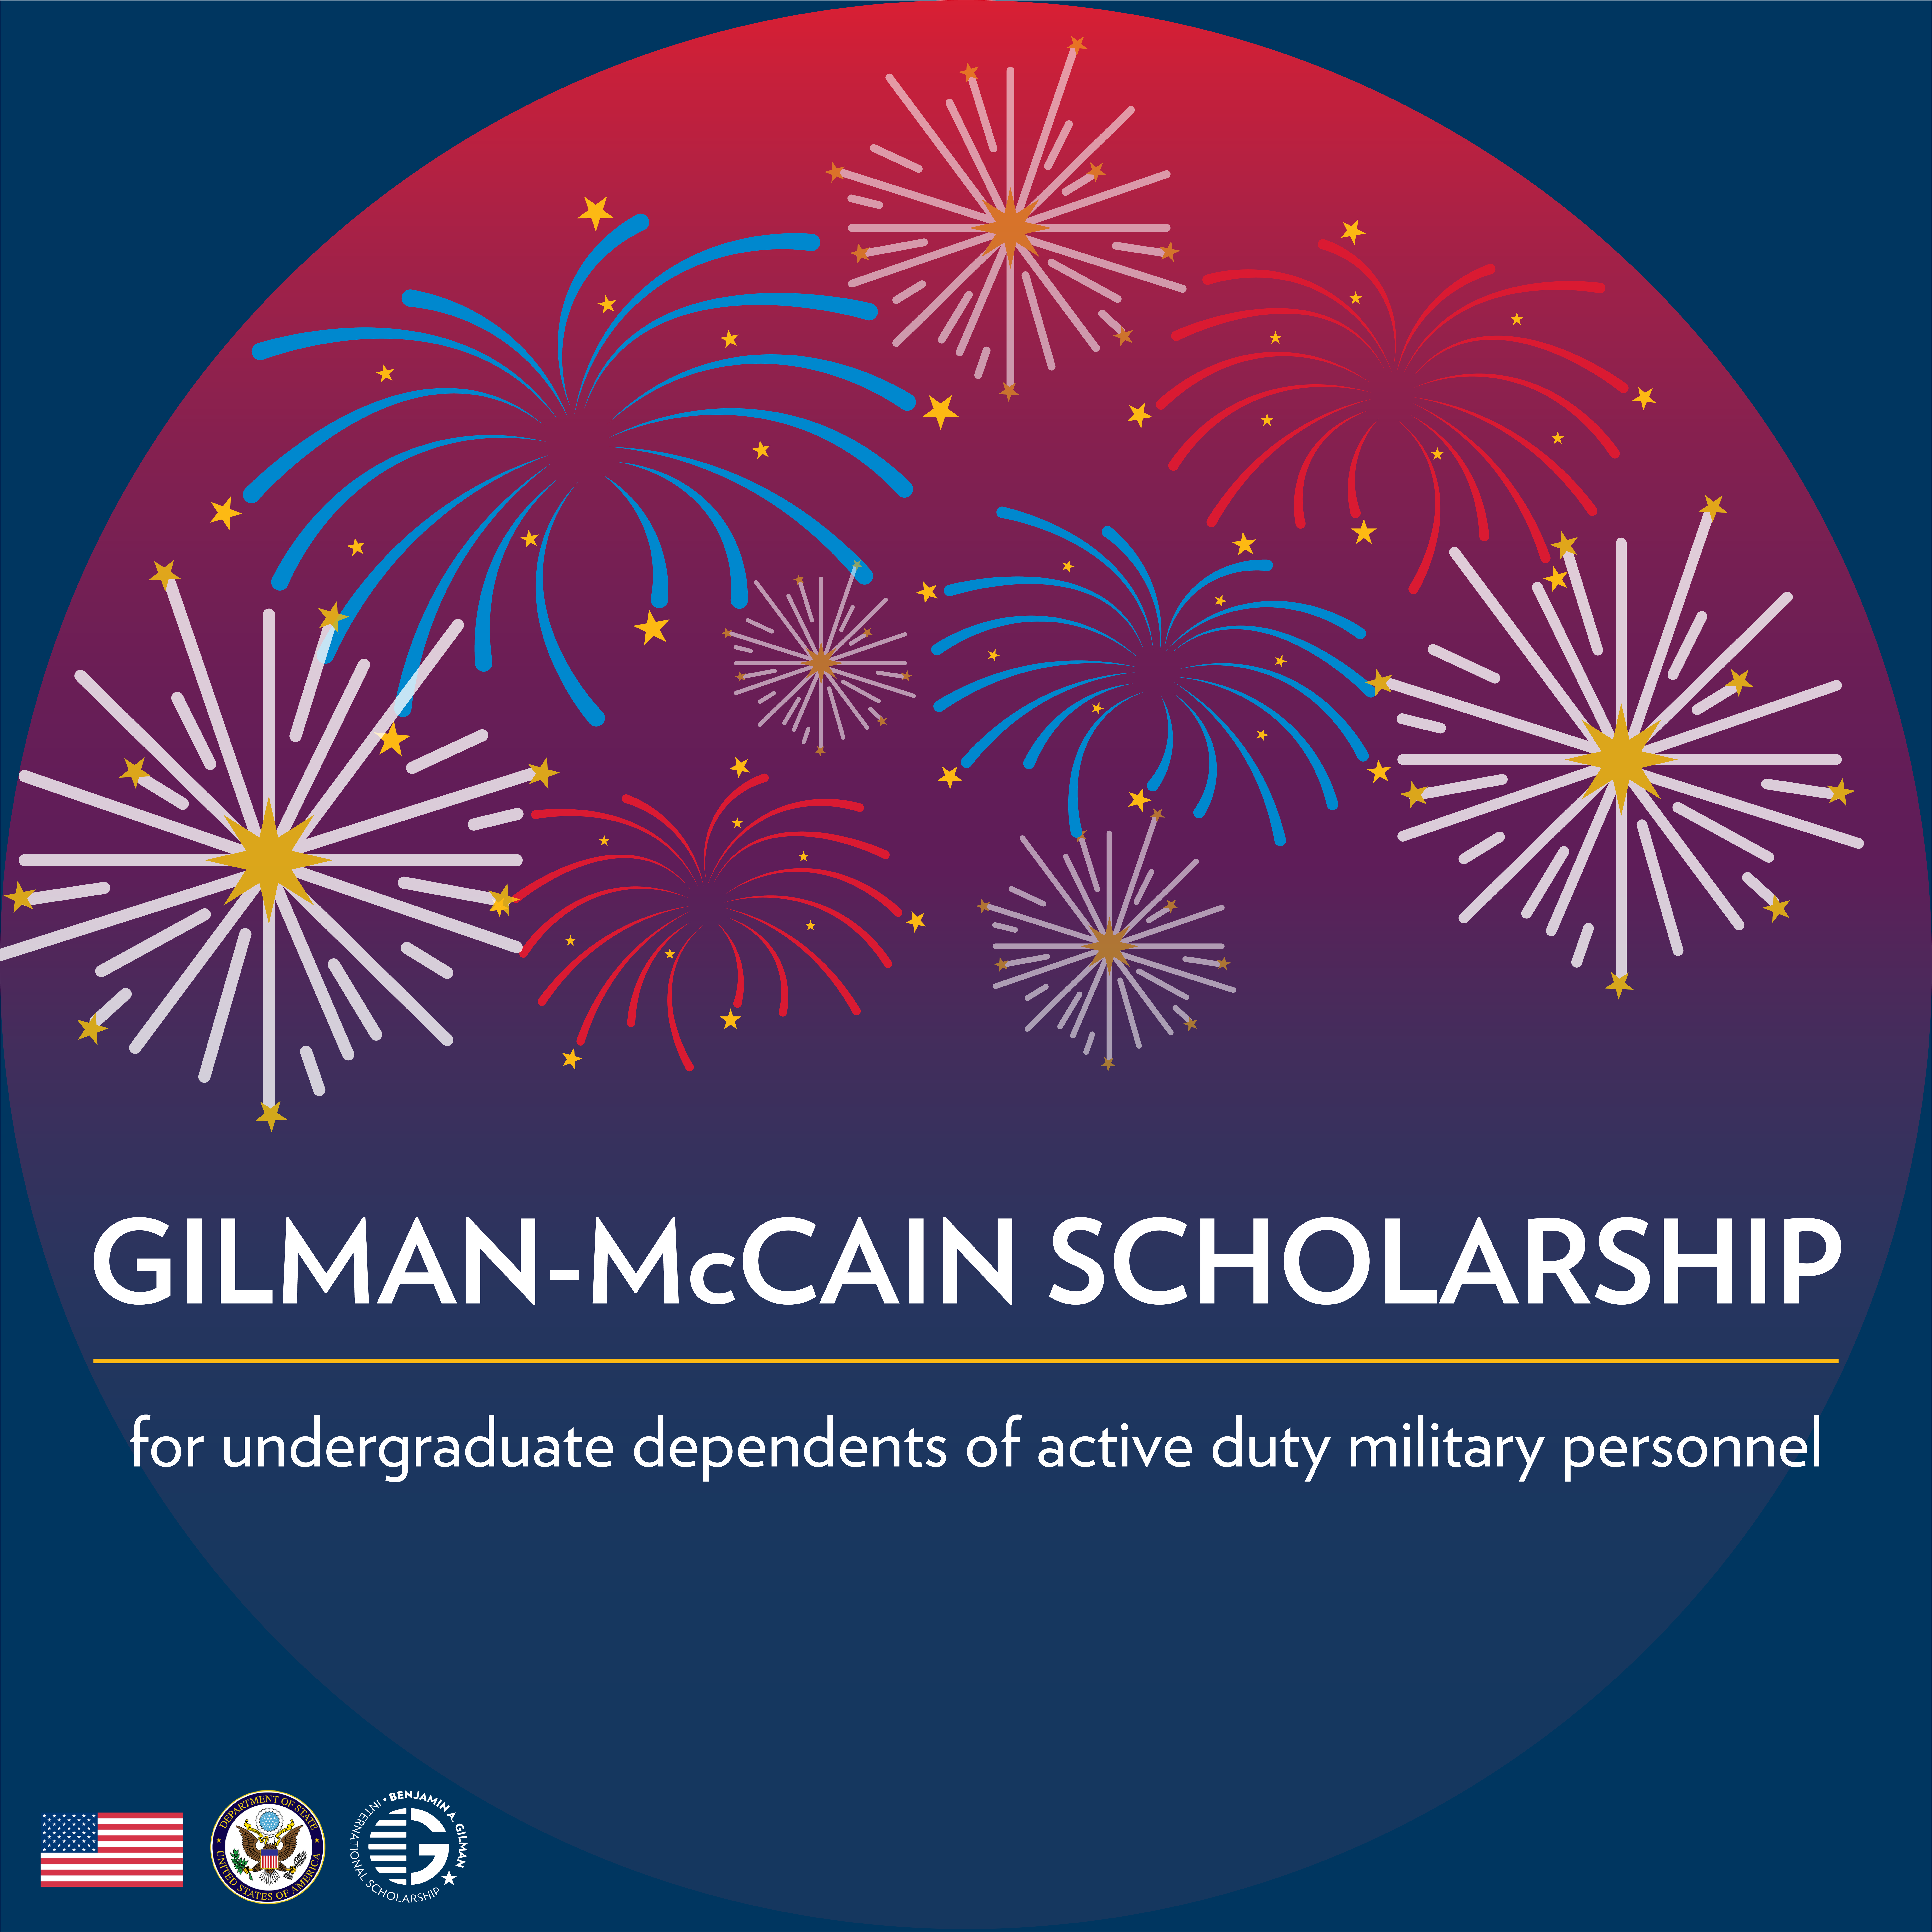 Gilman-McCain Scholarship for Undergraduate dependents of Active Duty Military Personnel - Social Media Graphic